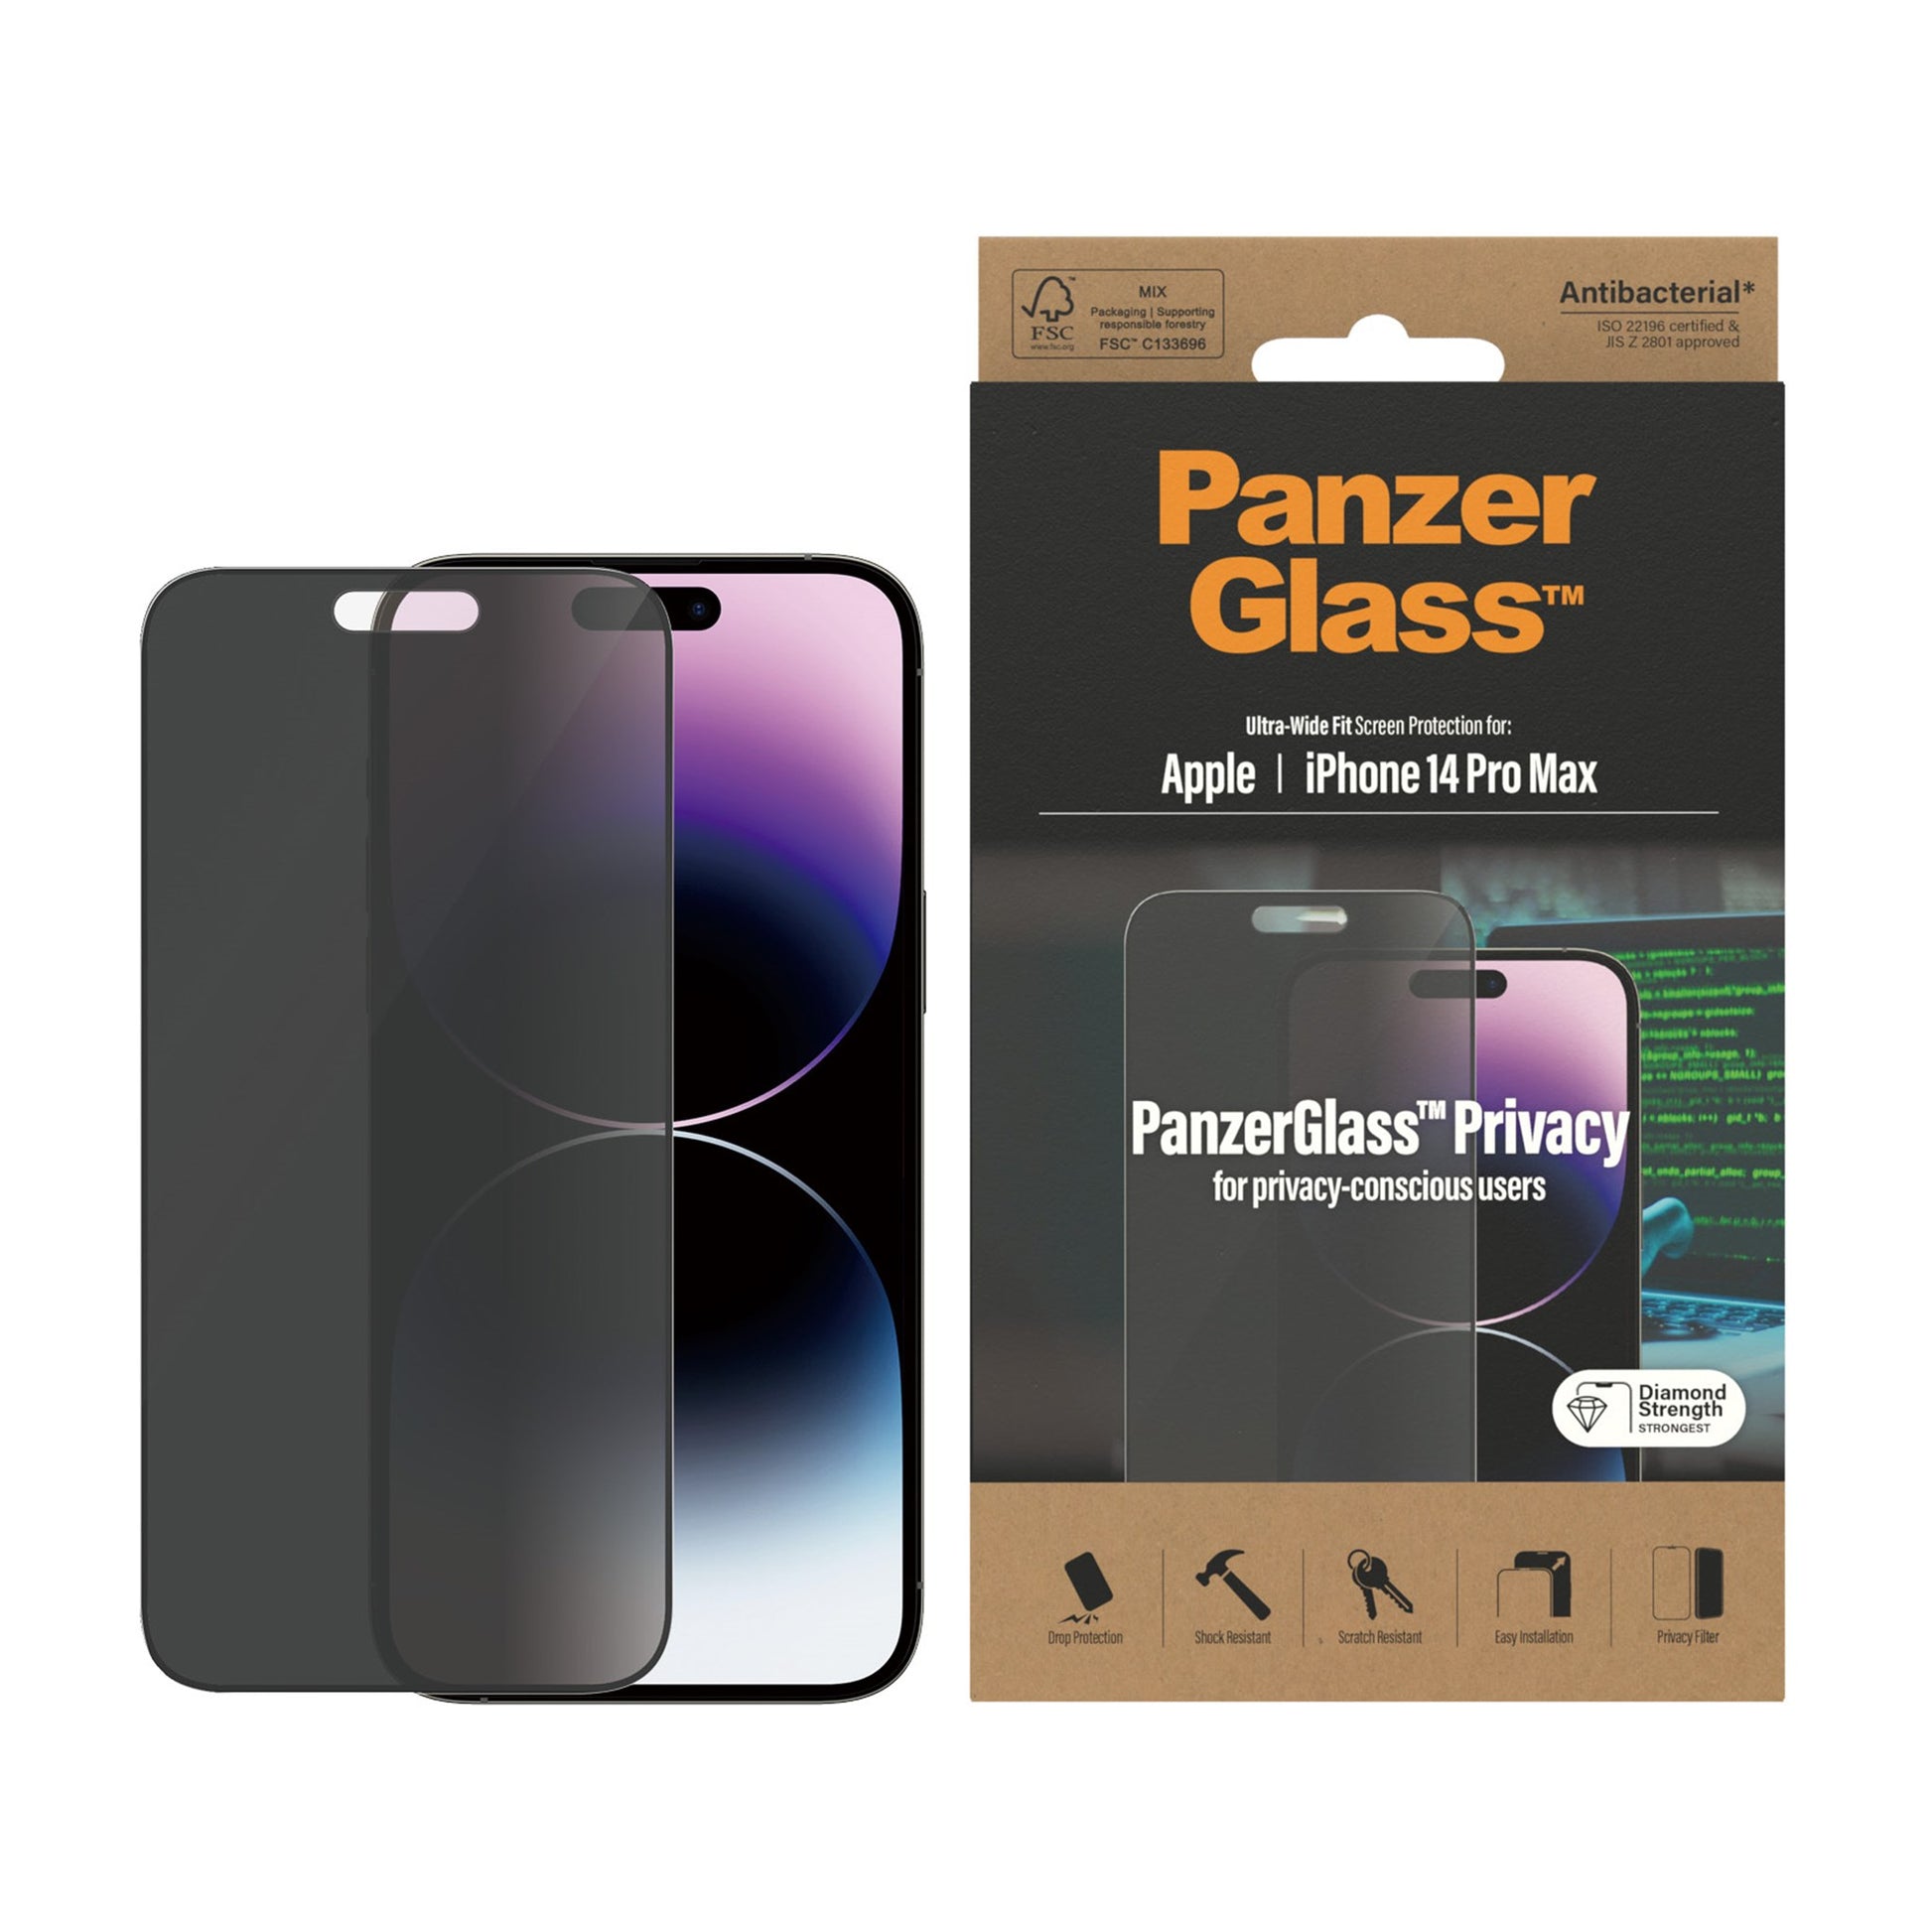 PanzerGlass™ Privacy Screen Protector Apple iPhone 14 Pro Max | Ultra-Wide Fit 2